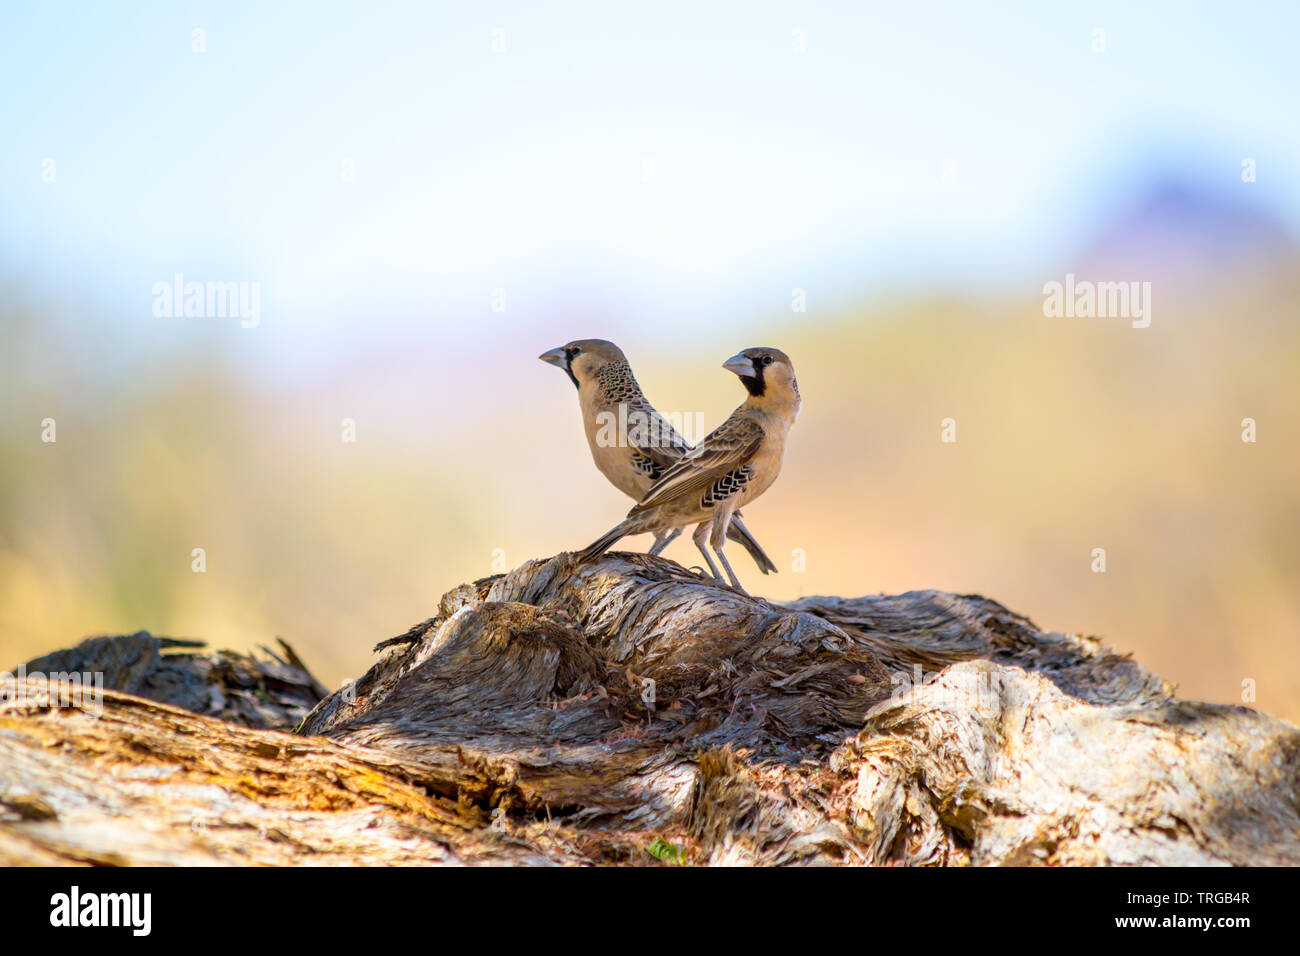 Two sparrows sitting on a branch of wood, looking in the same direction Stock Photo